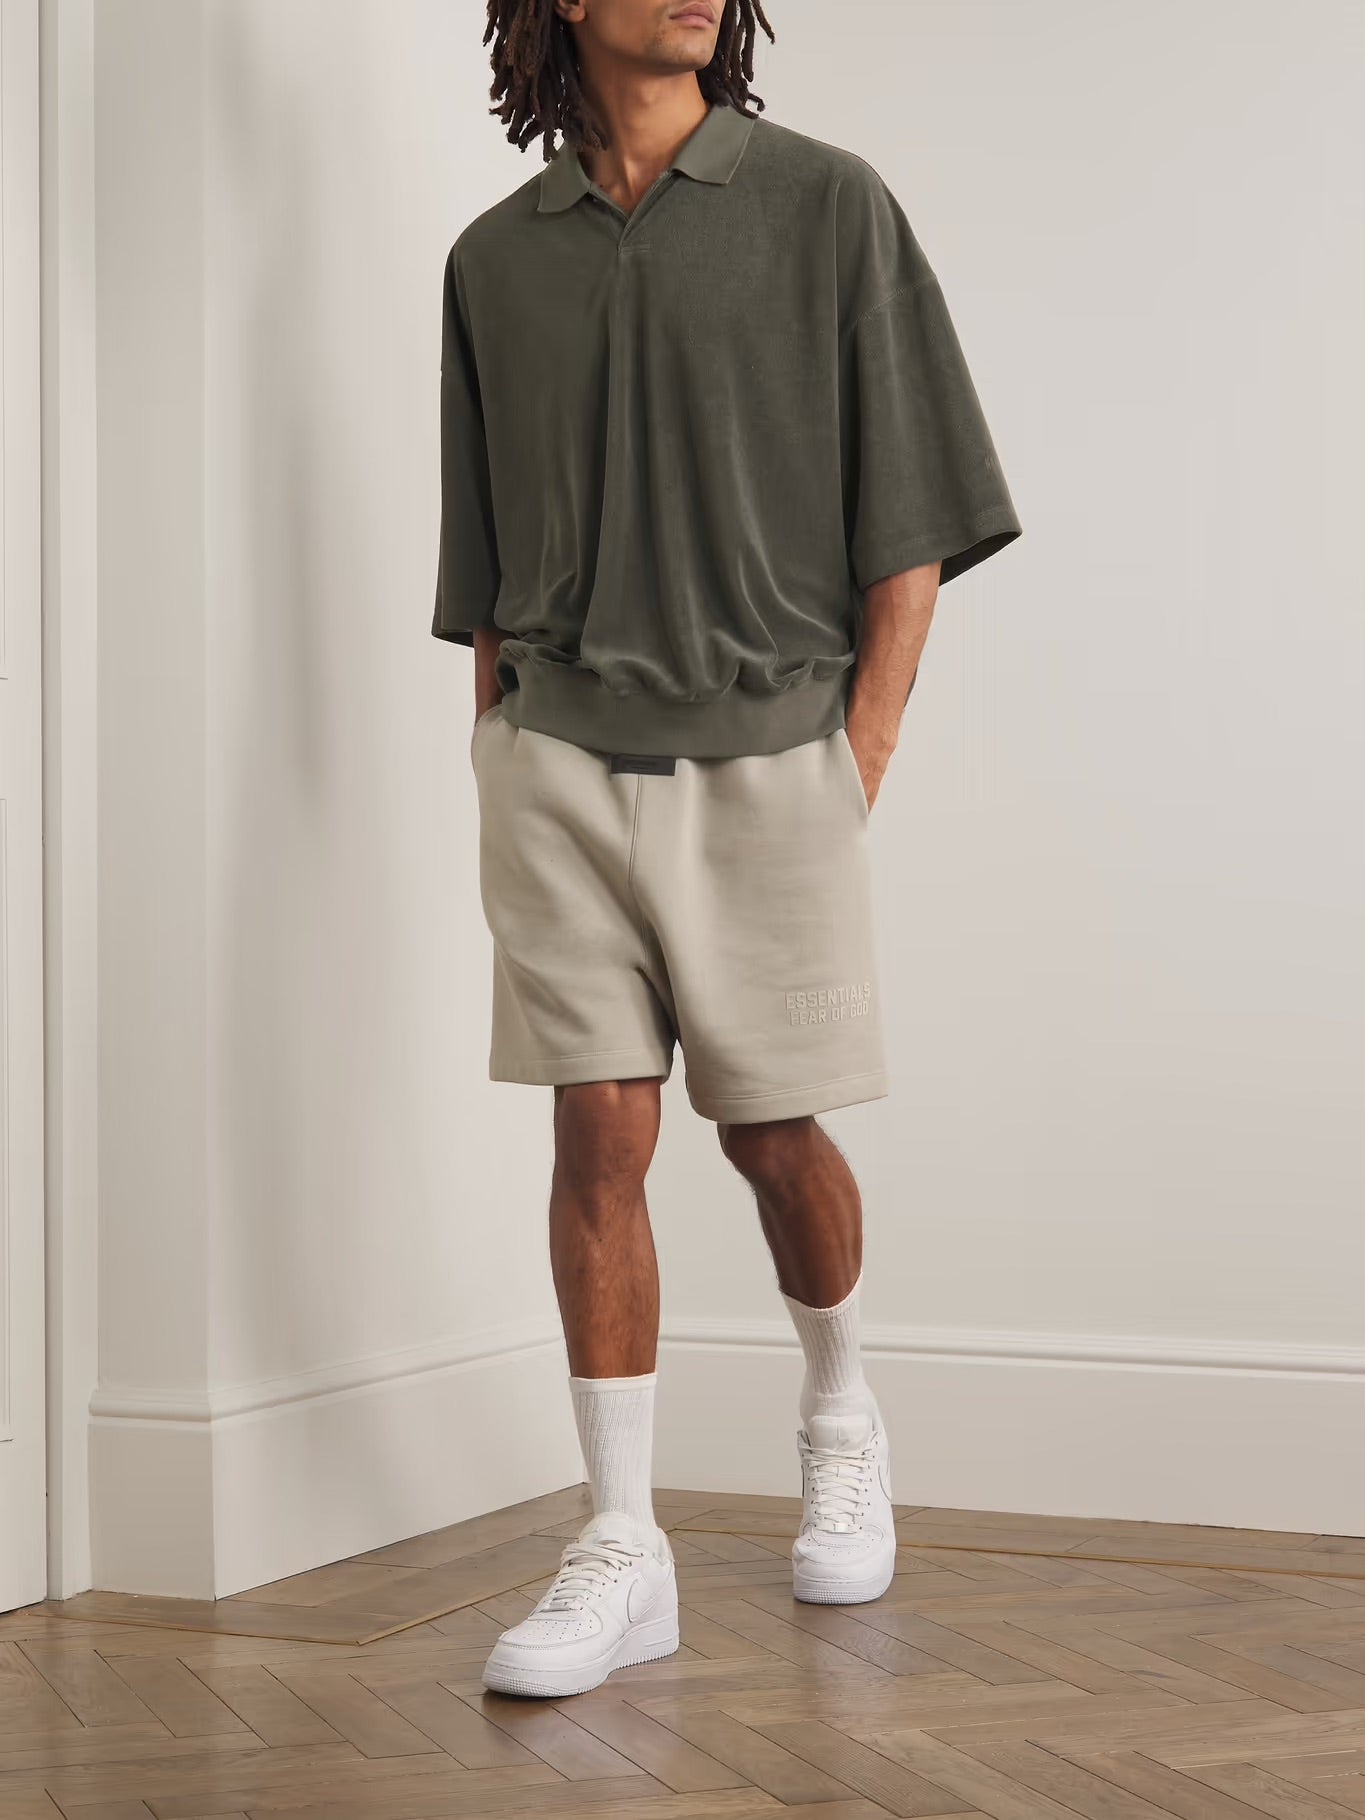 FEAR OF GOD - FEAR OF GOD SHORT SLEEVE TERRY POLO IN OFF BLACK - Rent With Thred